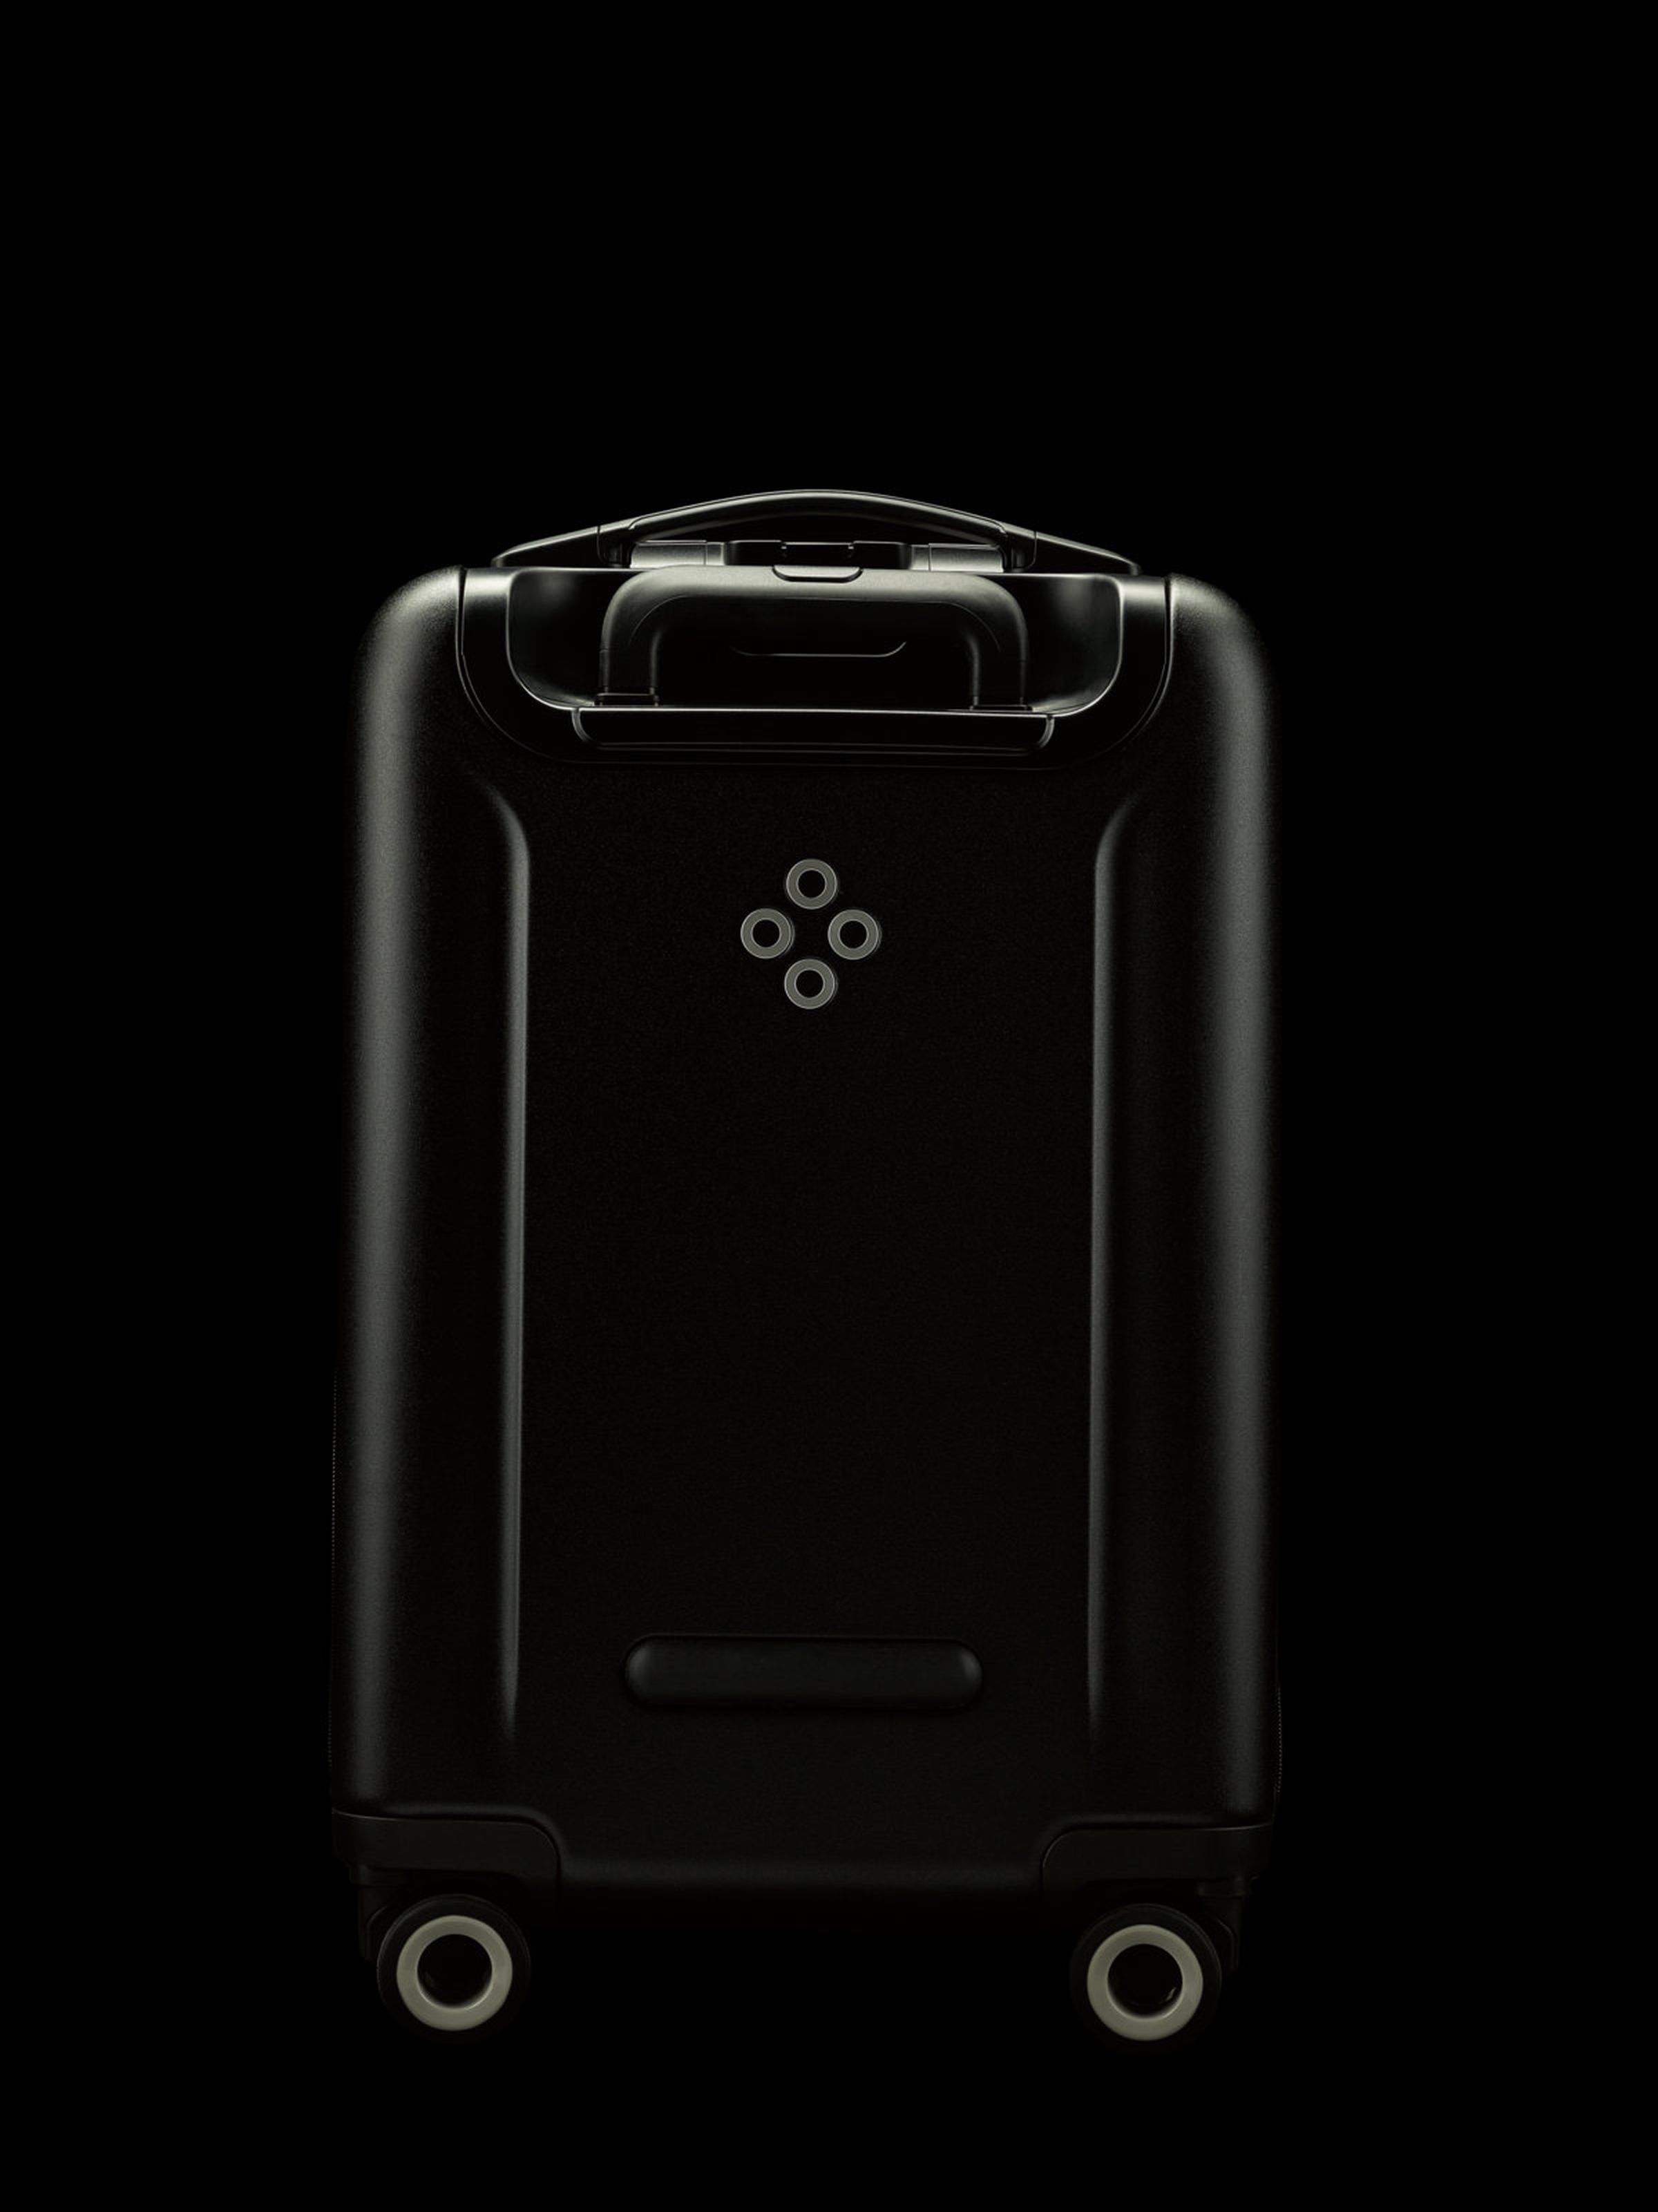 Bluesmart redesigned its connected luggage